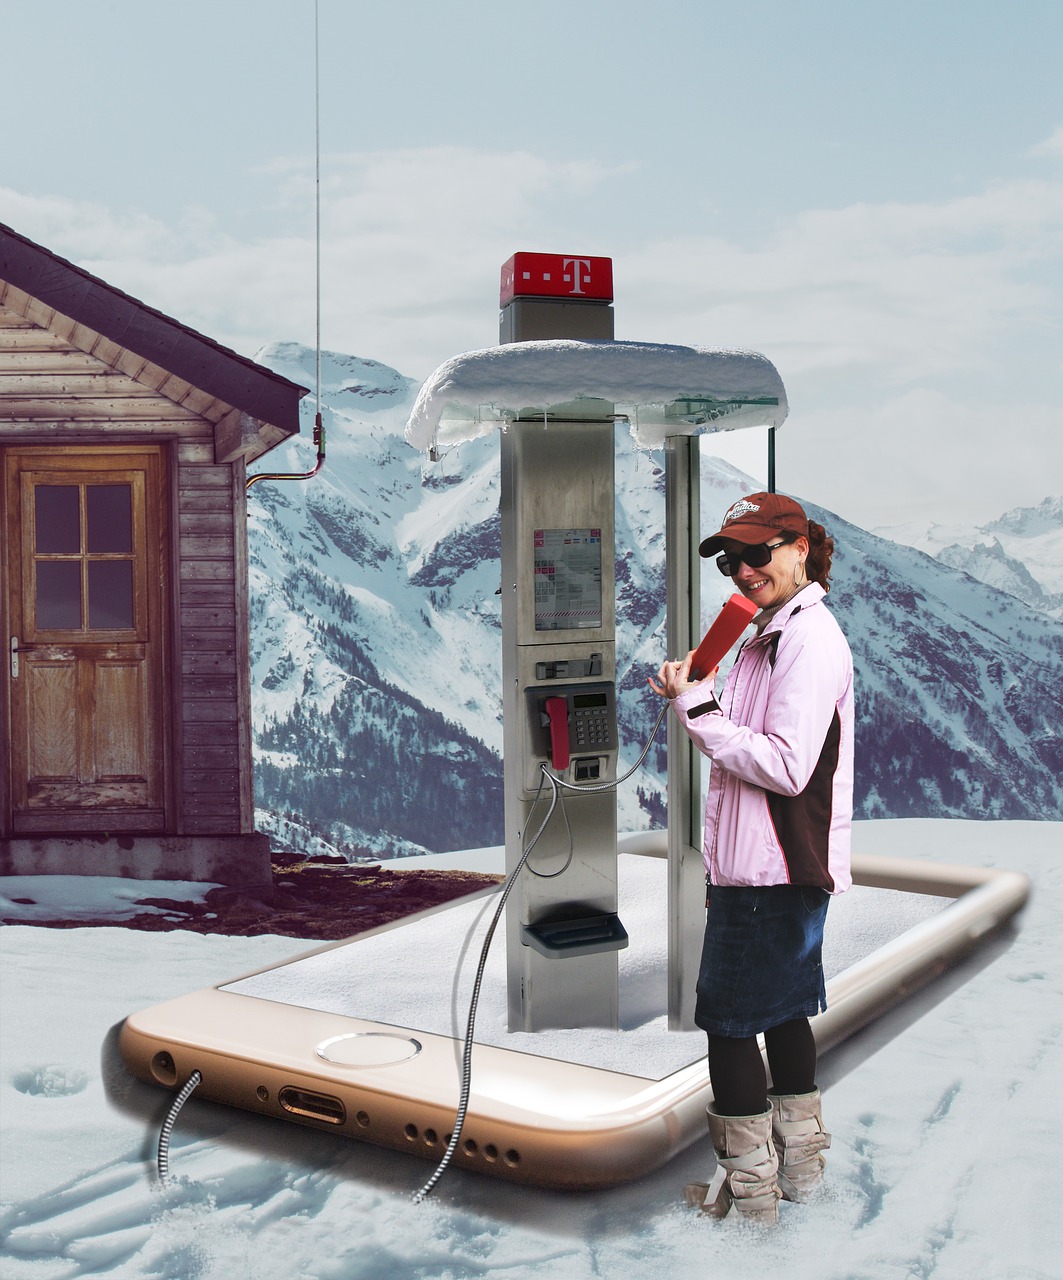 phone booth in the snow image manipulation phone free photo